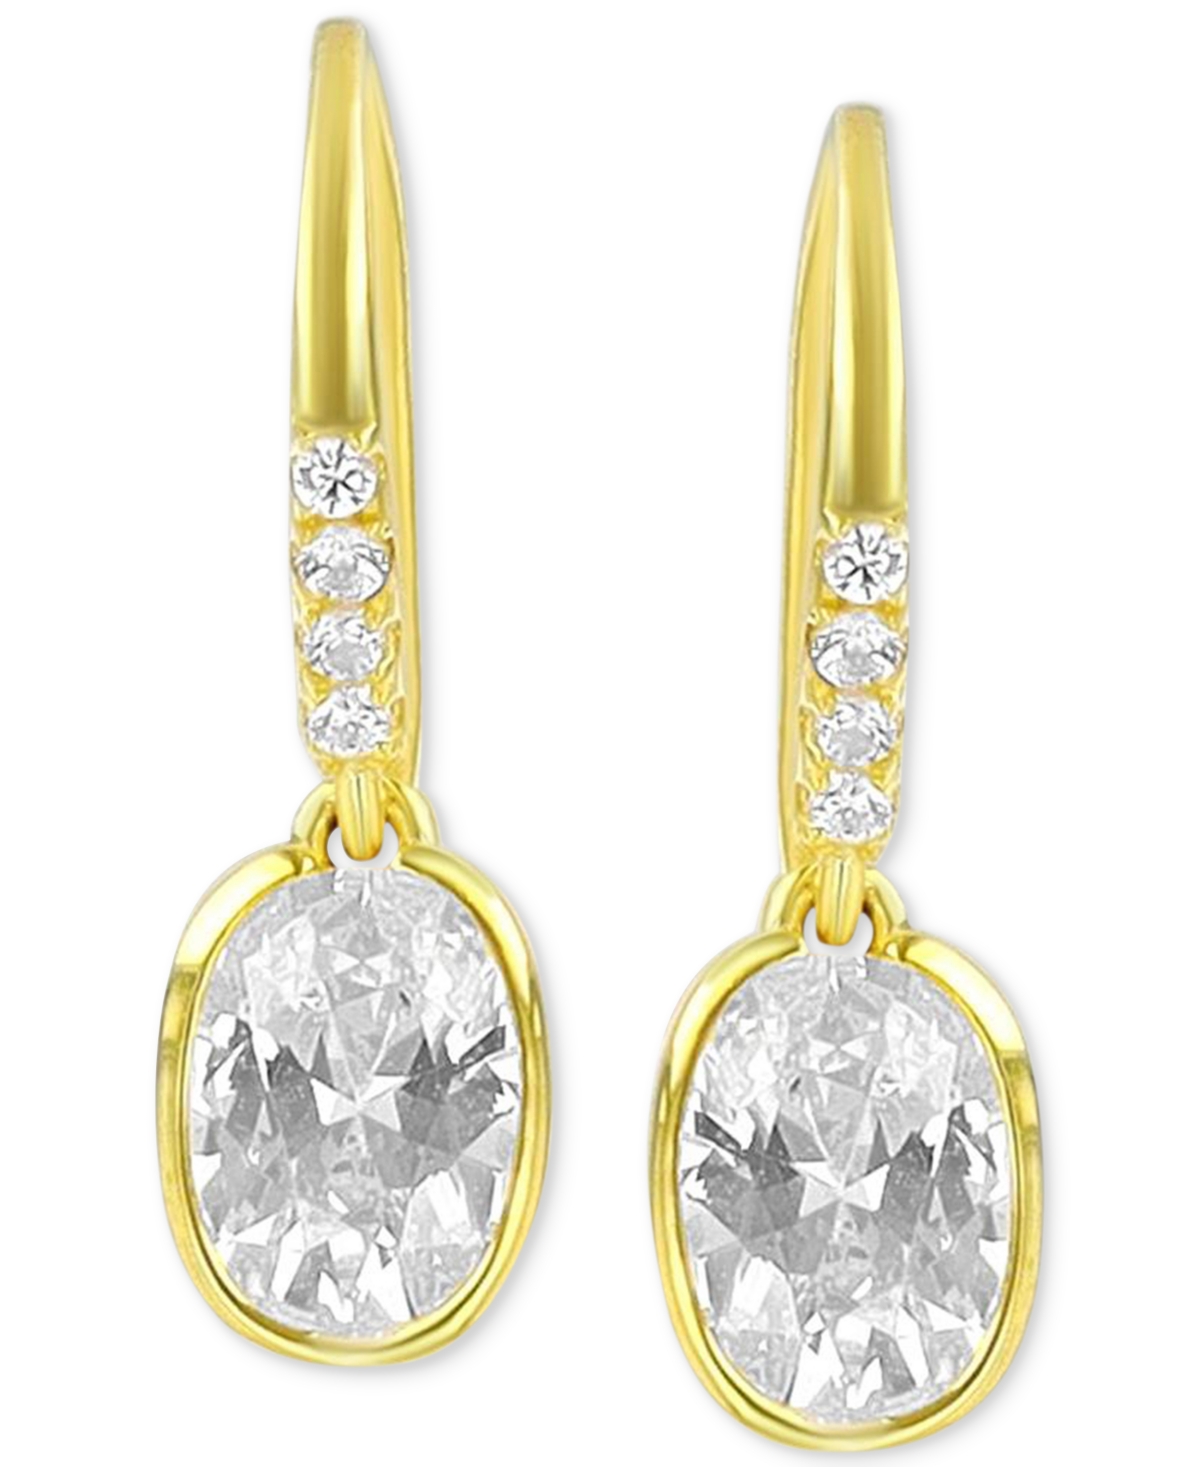 Cubic Zirconia Drop Earrings in 14k Gold-Plated Sterling Silver - Gold